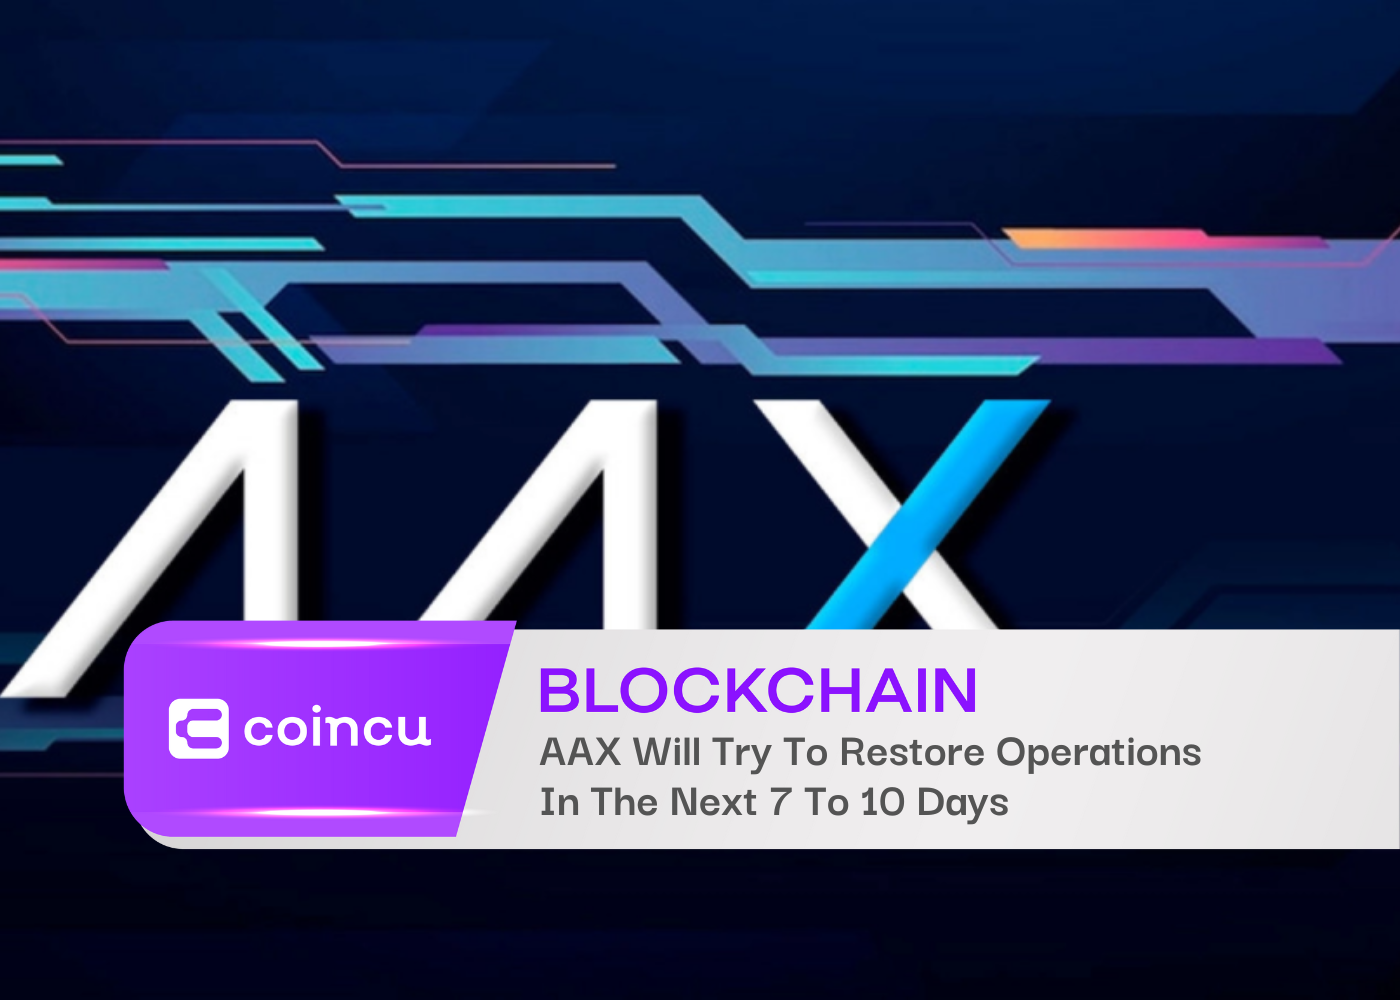 AAX Will Try To Restore Operations In The Next 7 To 10 Days